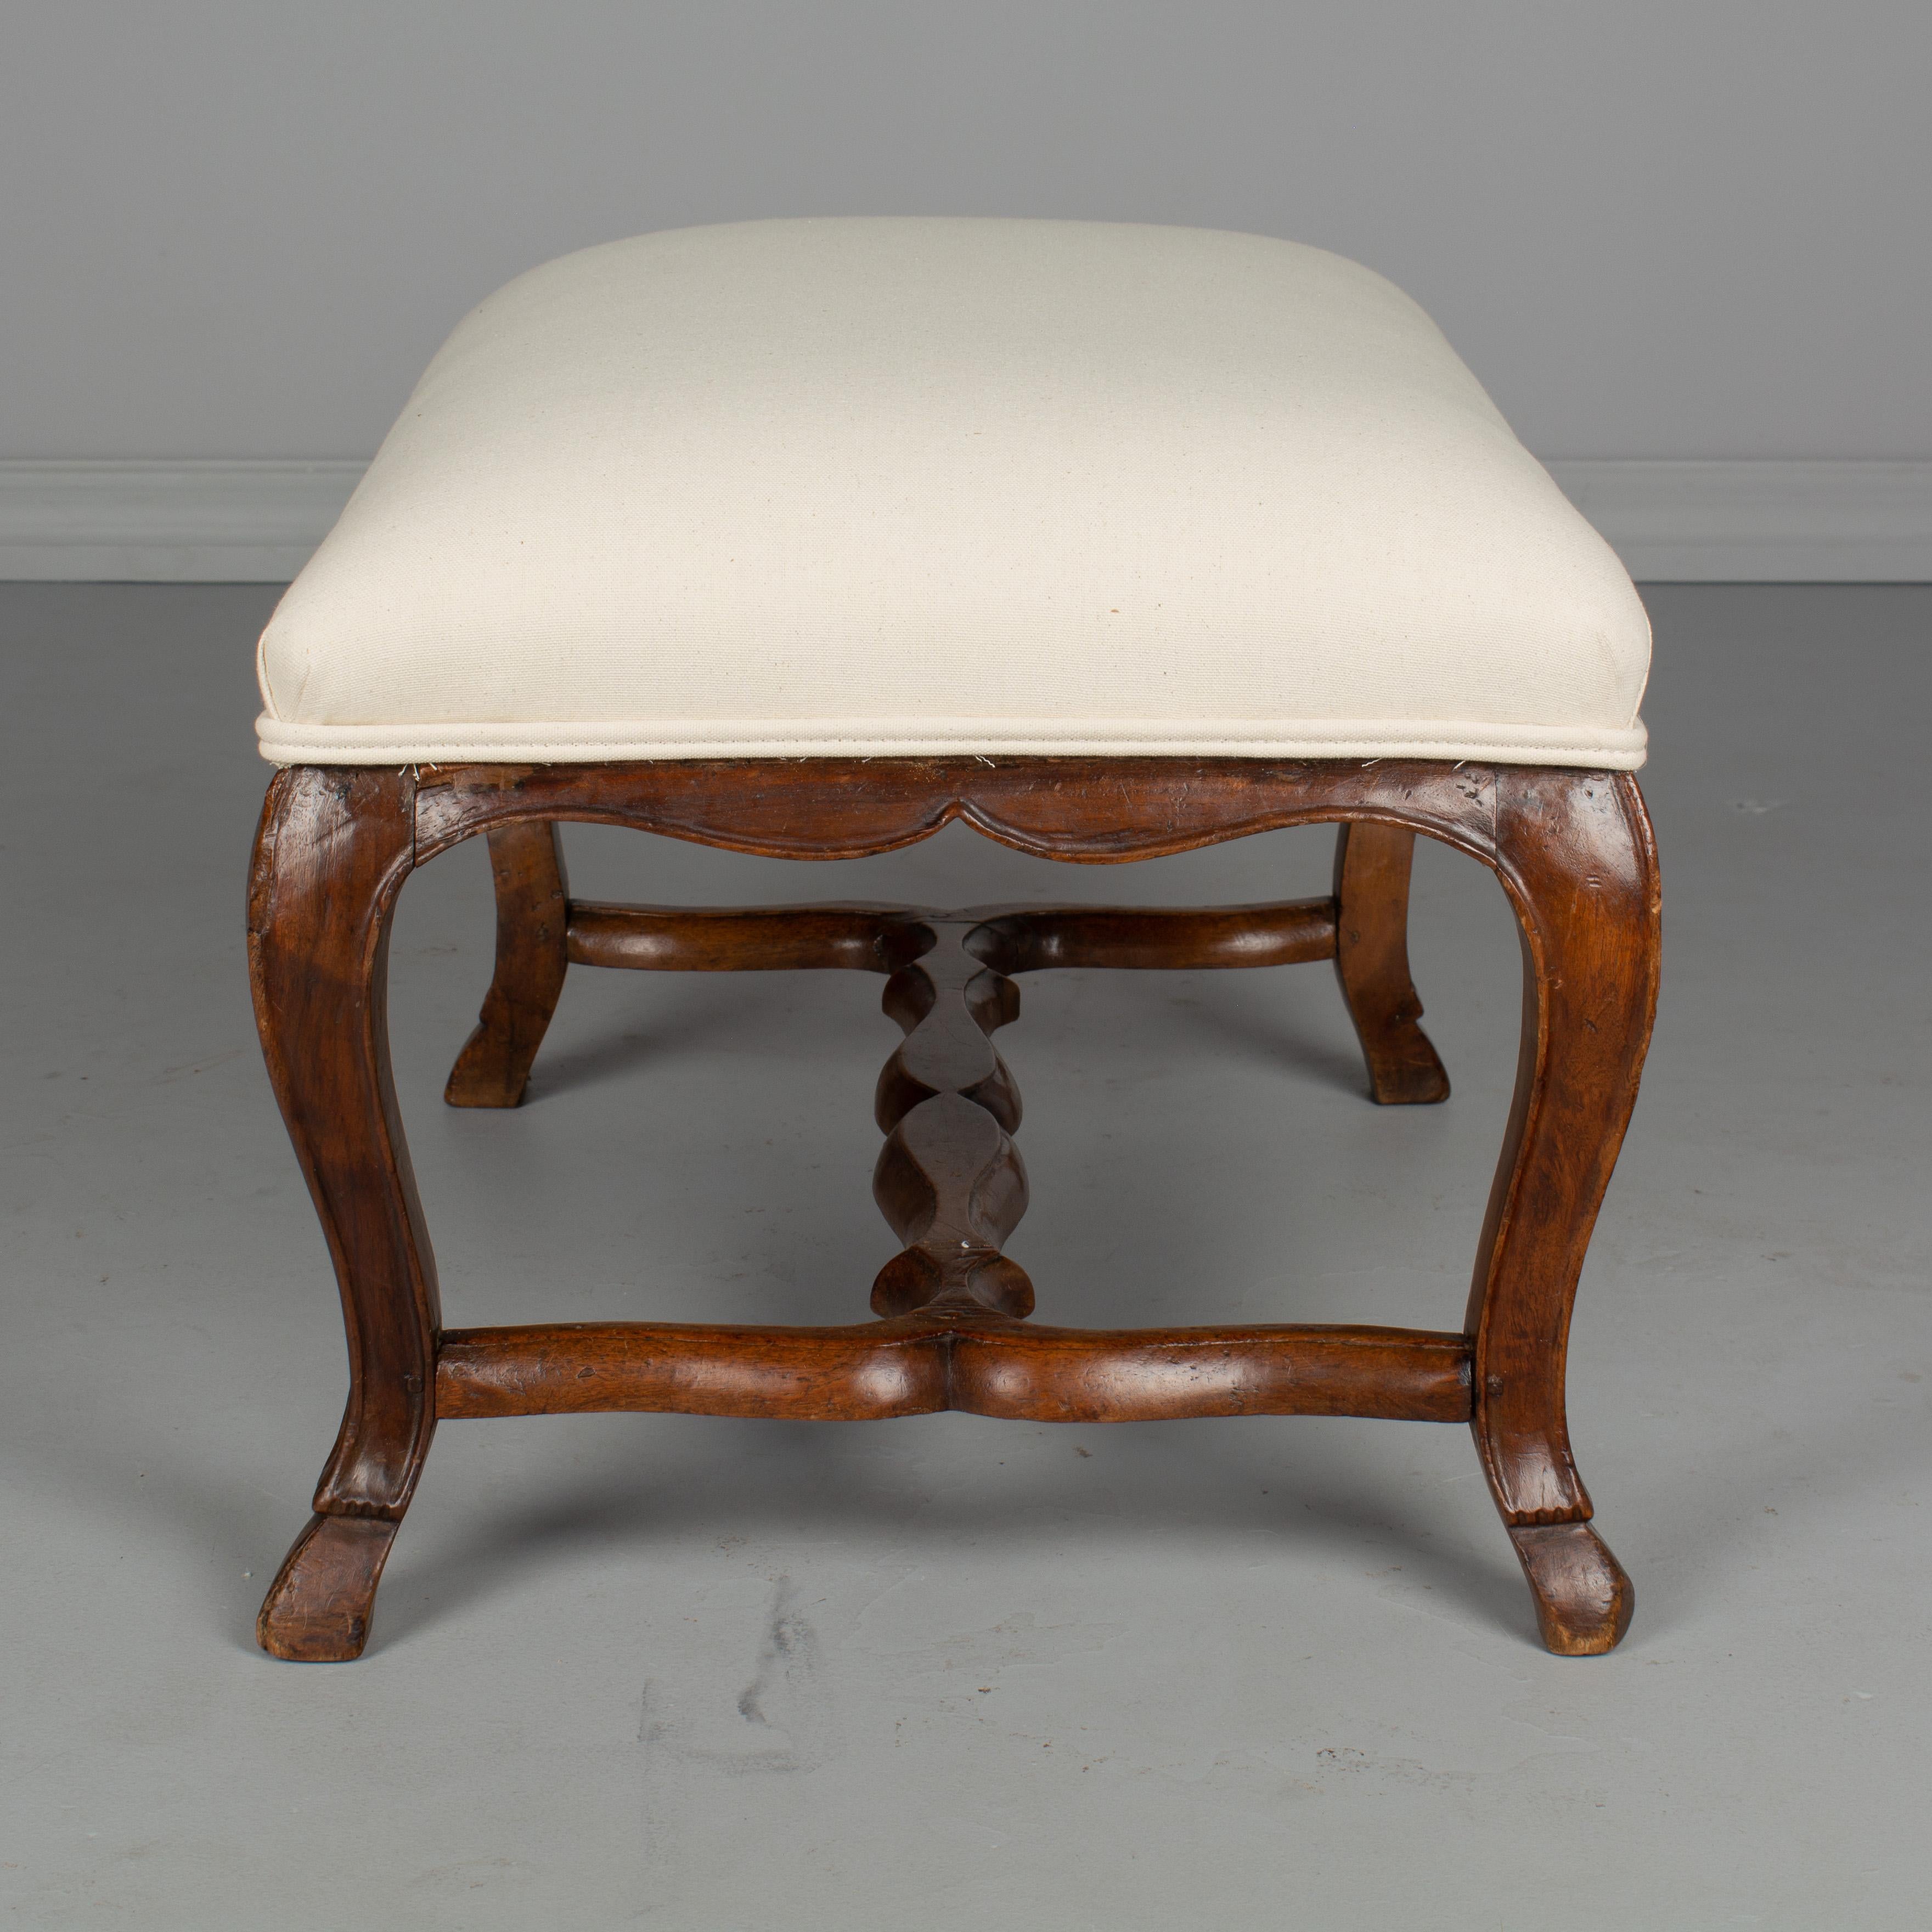 Hand-Carved 18th Century Louis XV Style Foot Stool